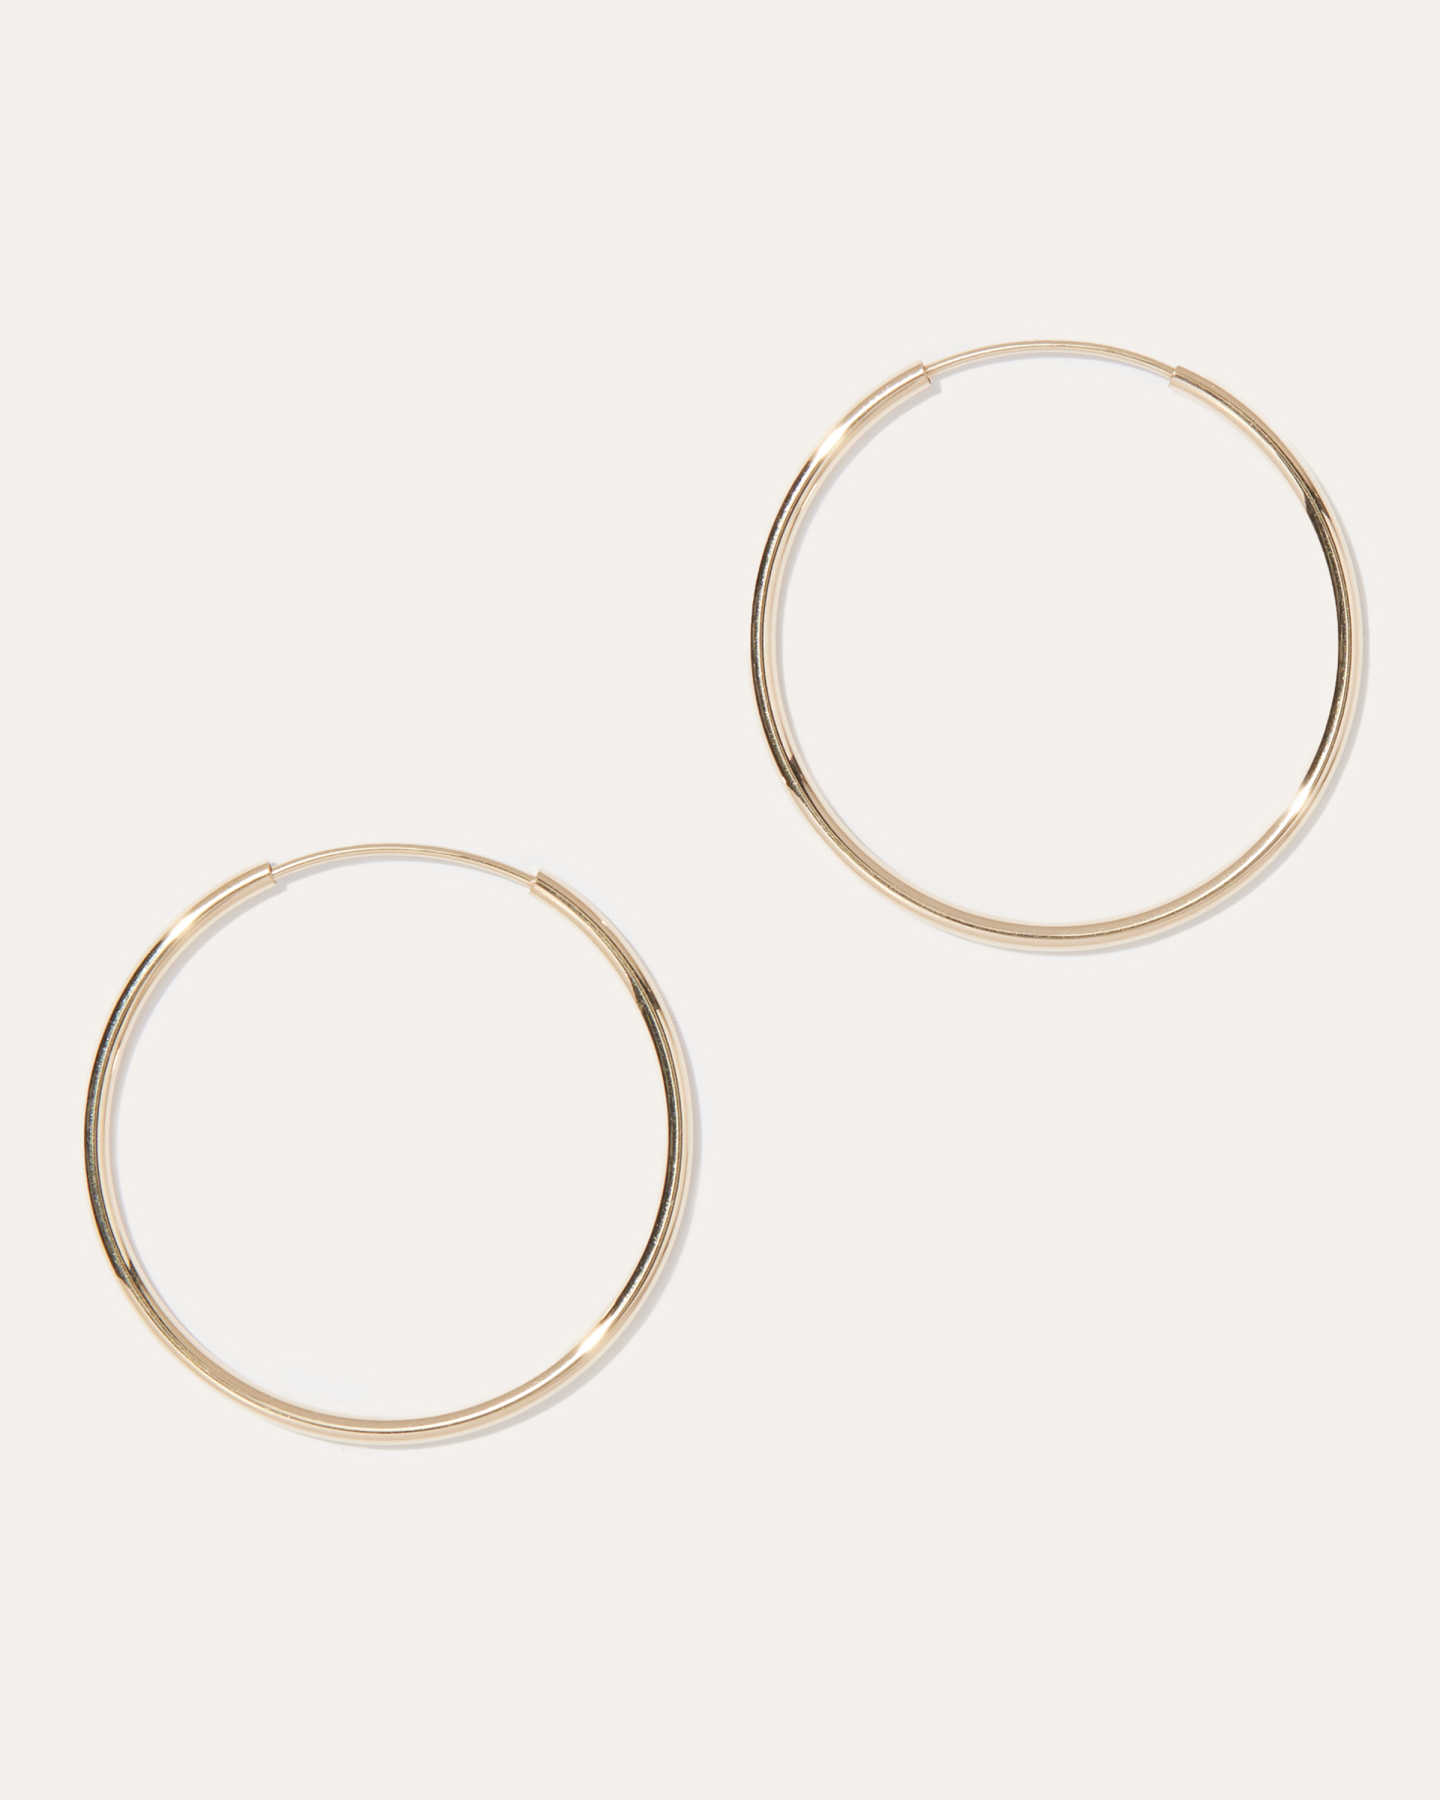 You May Also Like - 14k Gold Everyday 25mm Hoop Earrings - Yellow Gold